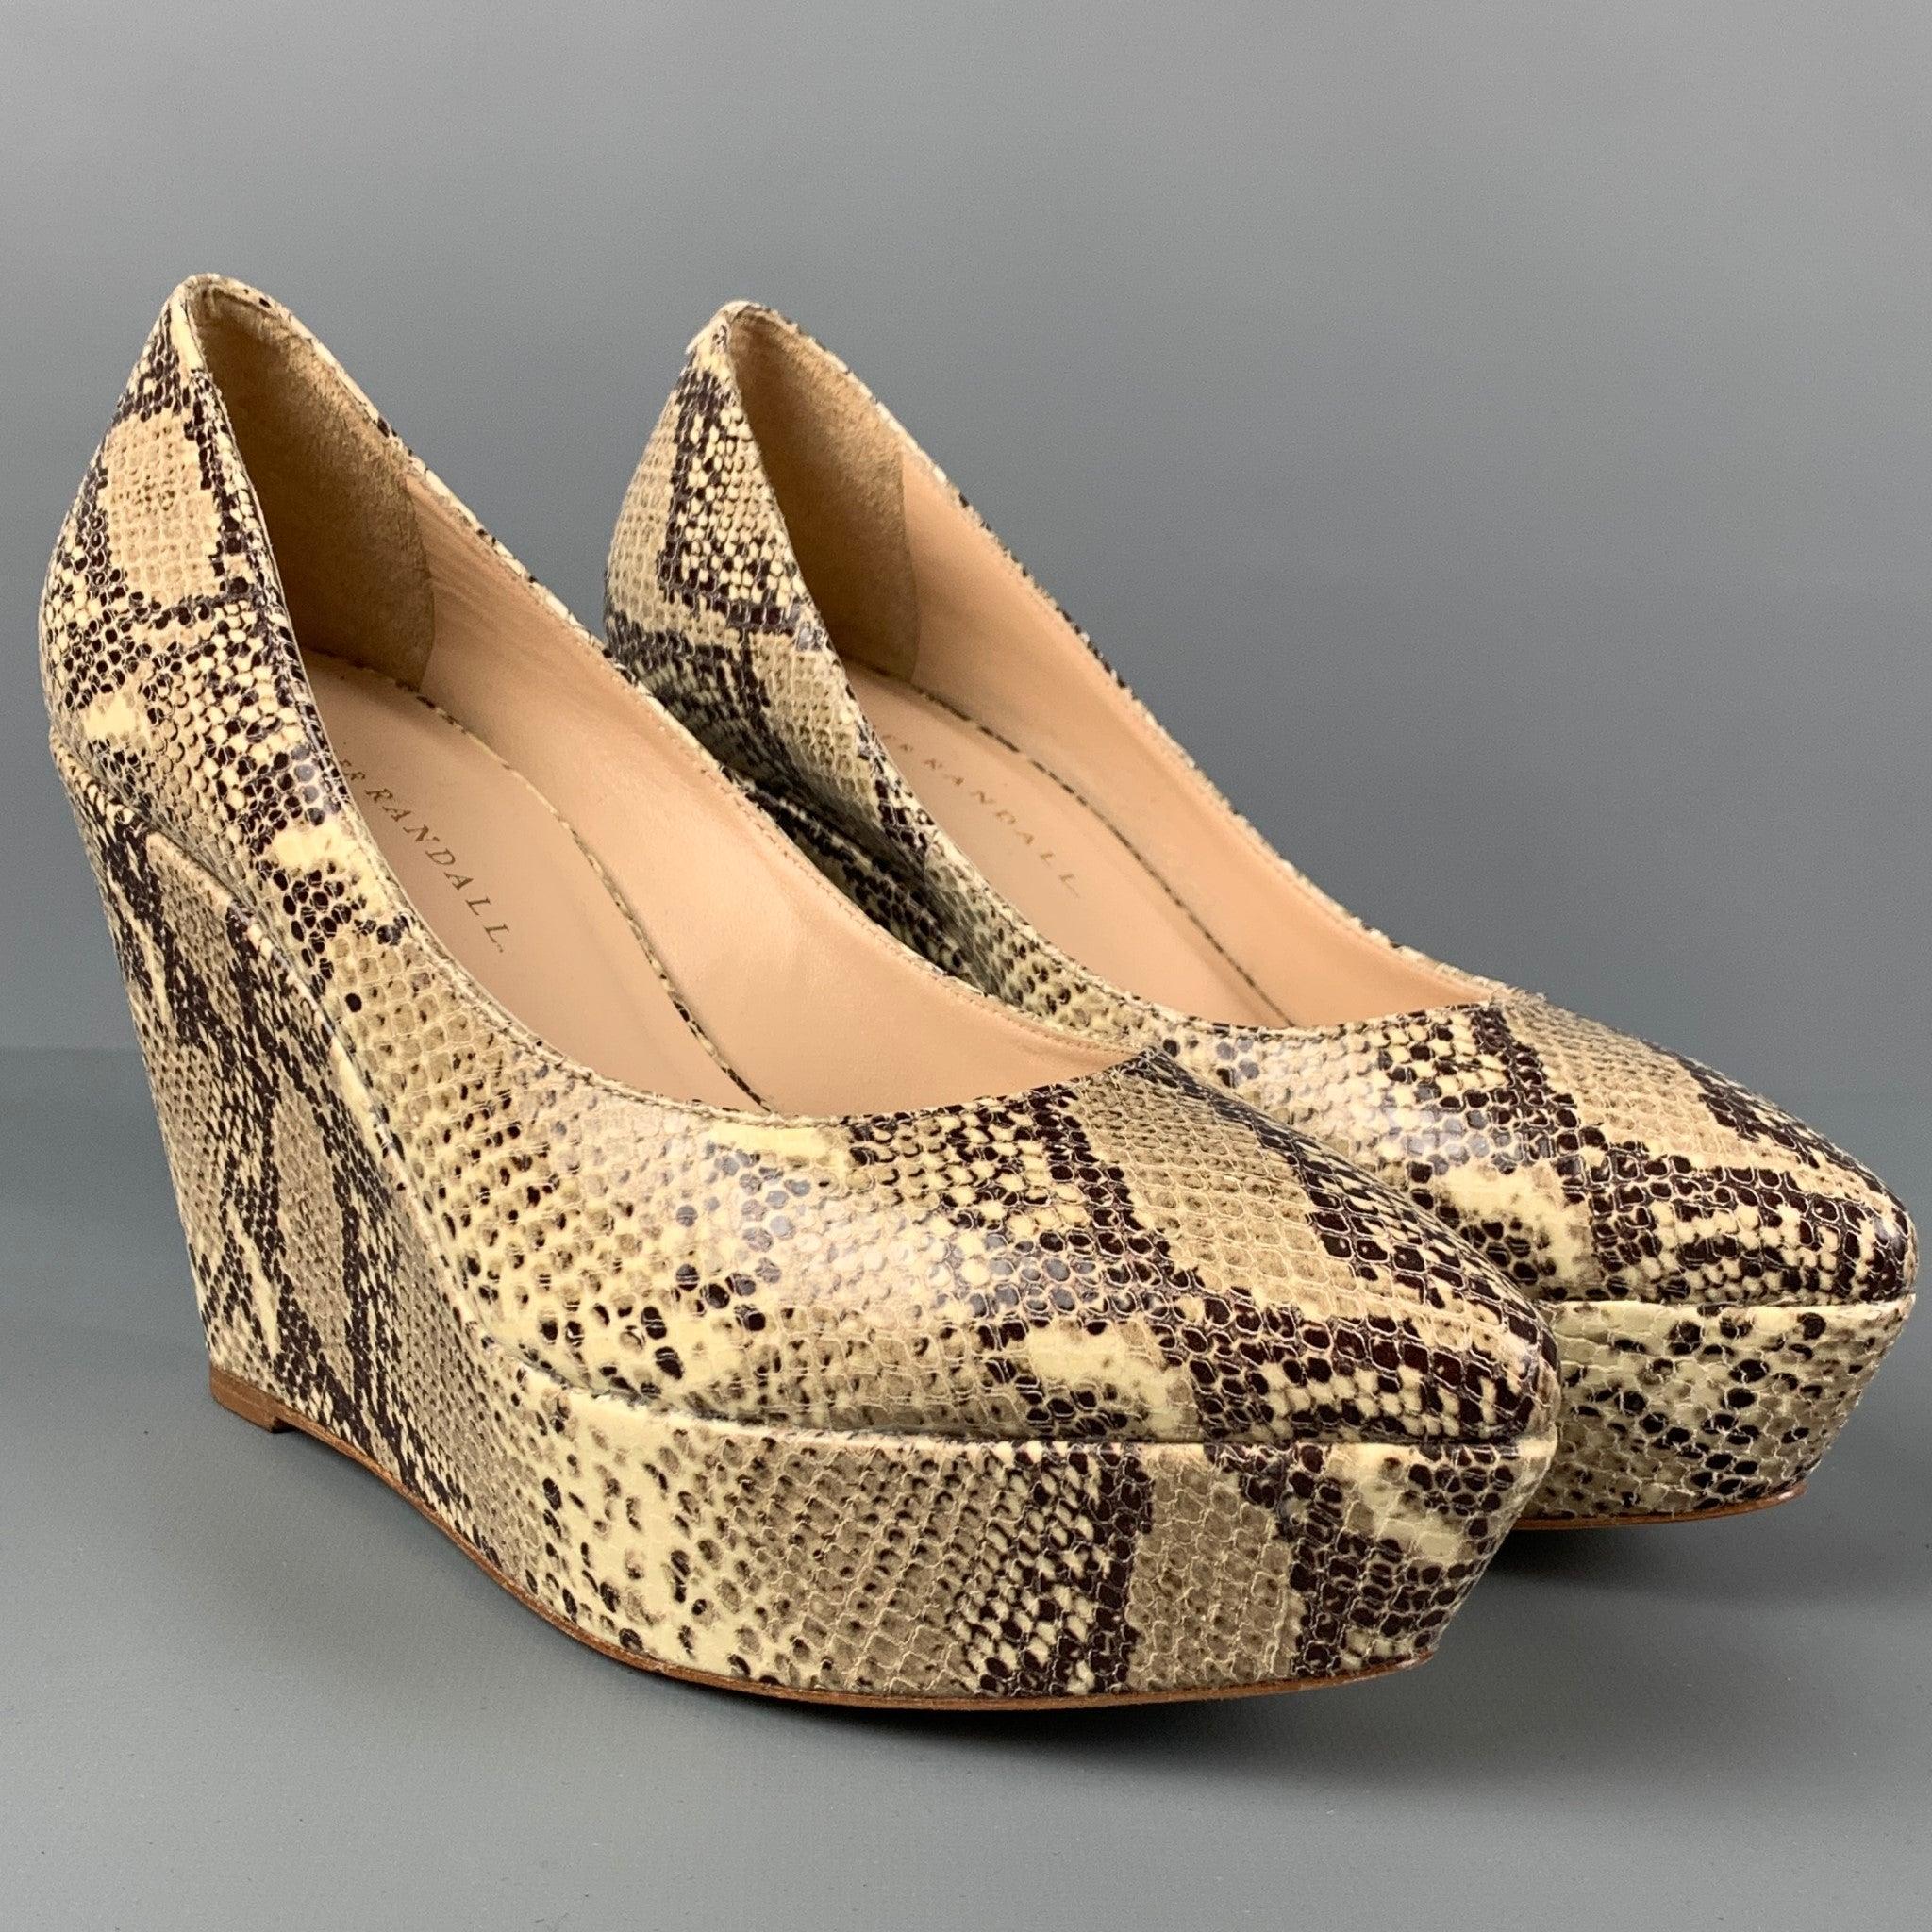 LOEFFLER RANDALL pumps comes in a grey & beige leather snake skin print featuring a pointed toe and a wedge heel.
Very Good
Pre-Owned Condition. 

Marked:   8 

Measurements: 
  Heel: 4 inches  Platform: 1 inches 
  
  
 
Reference: 115611
Category: